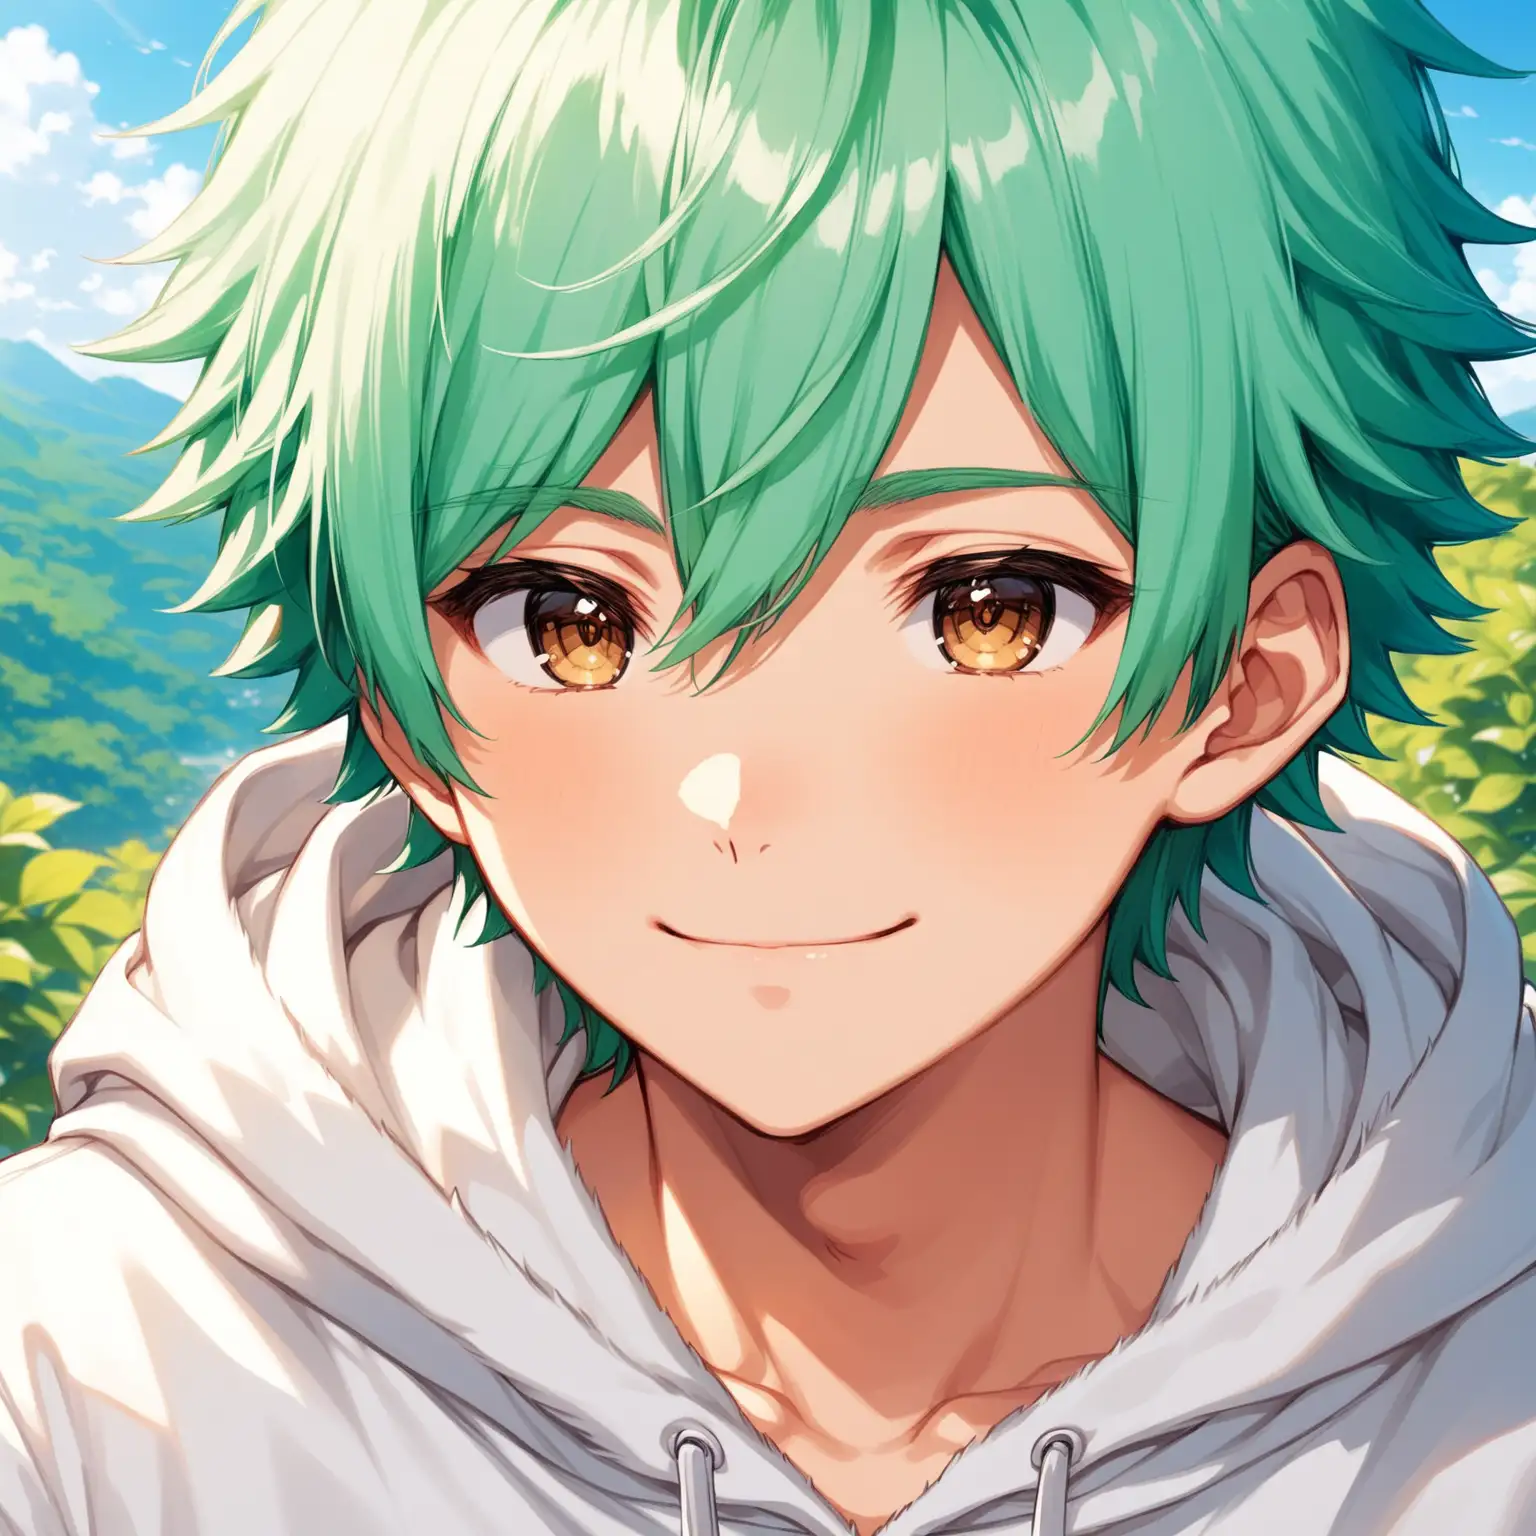 Cute Anime Boy Portrait Fluffy Mint Hair and White Hoodie in Natural Outdoor Light